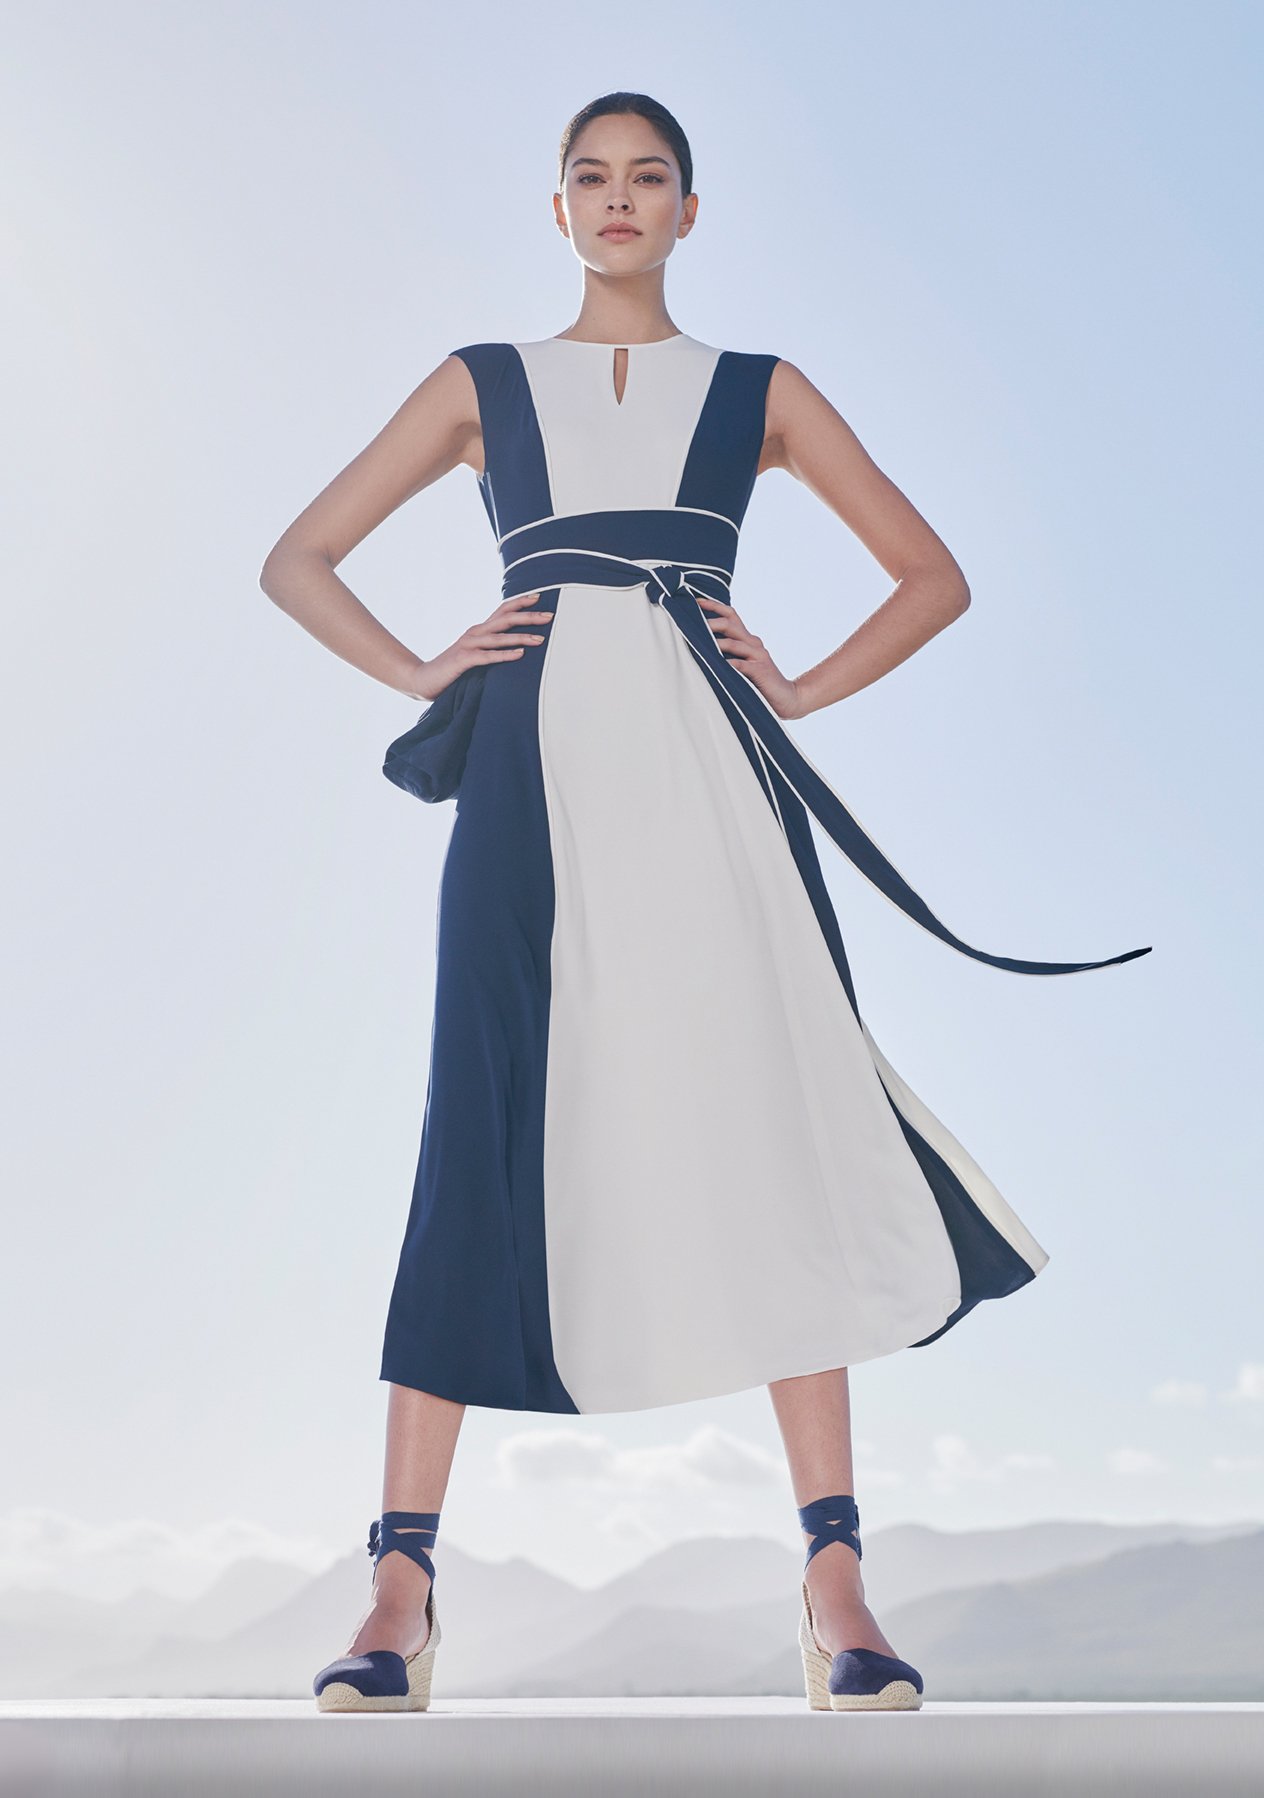 Colourblock fit and flare dress in navy and white paired with navy espadrilles by Hobbs.